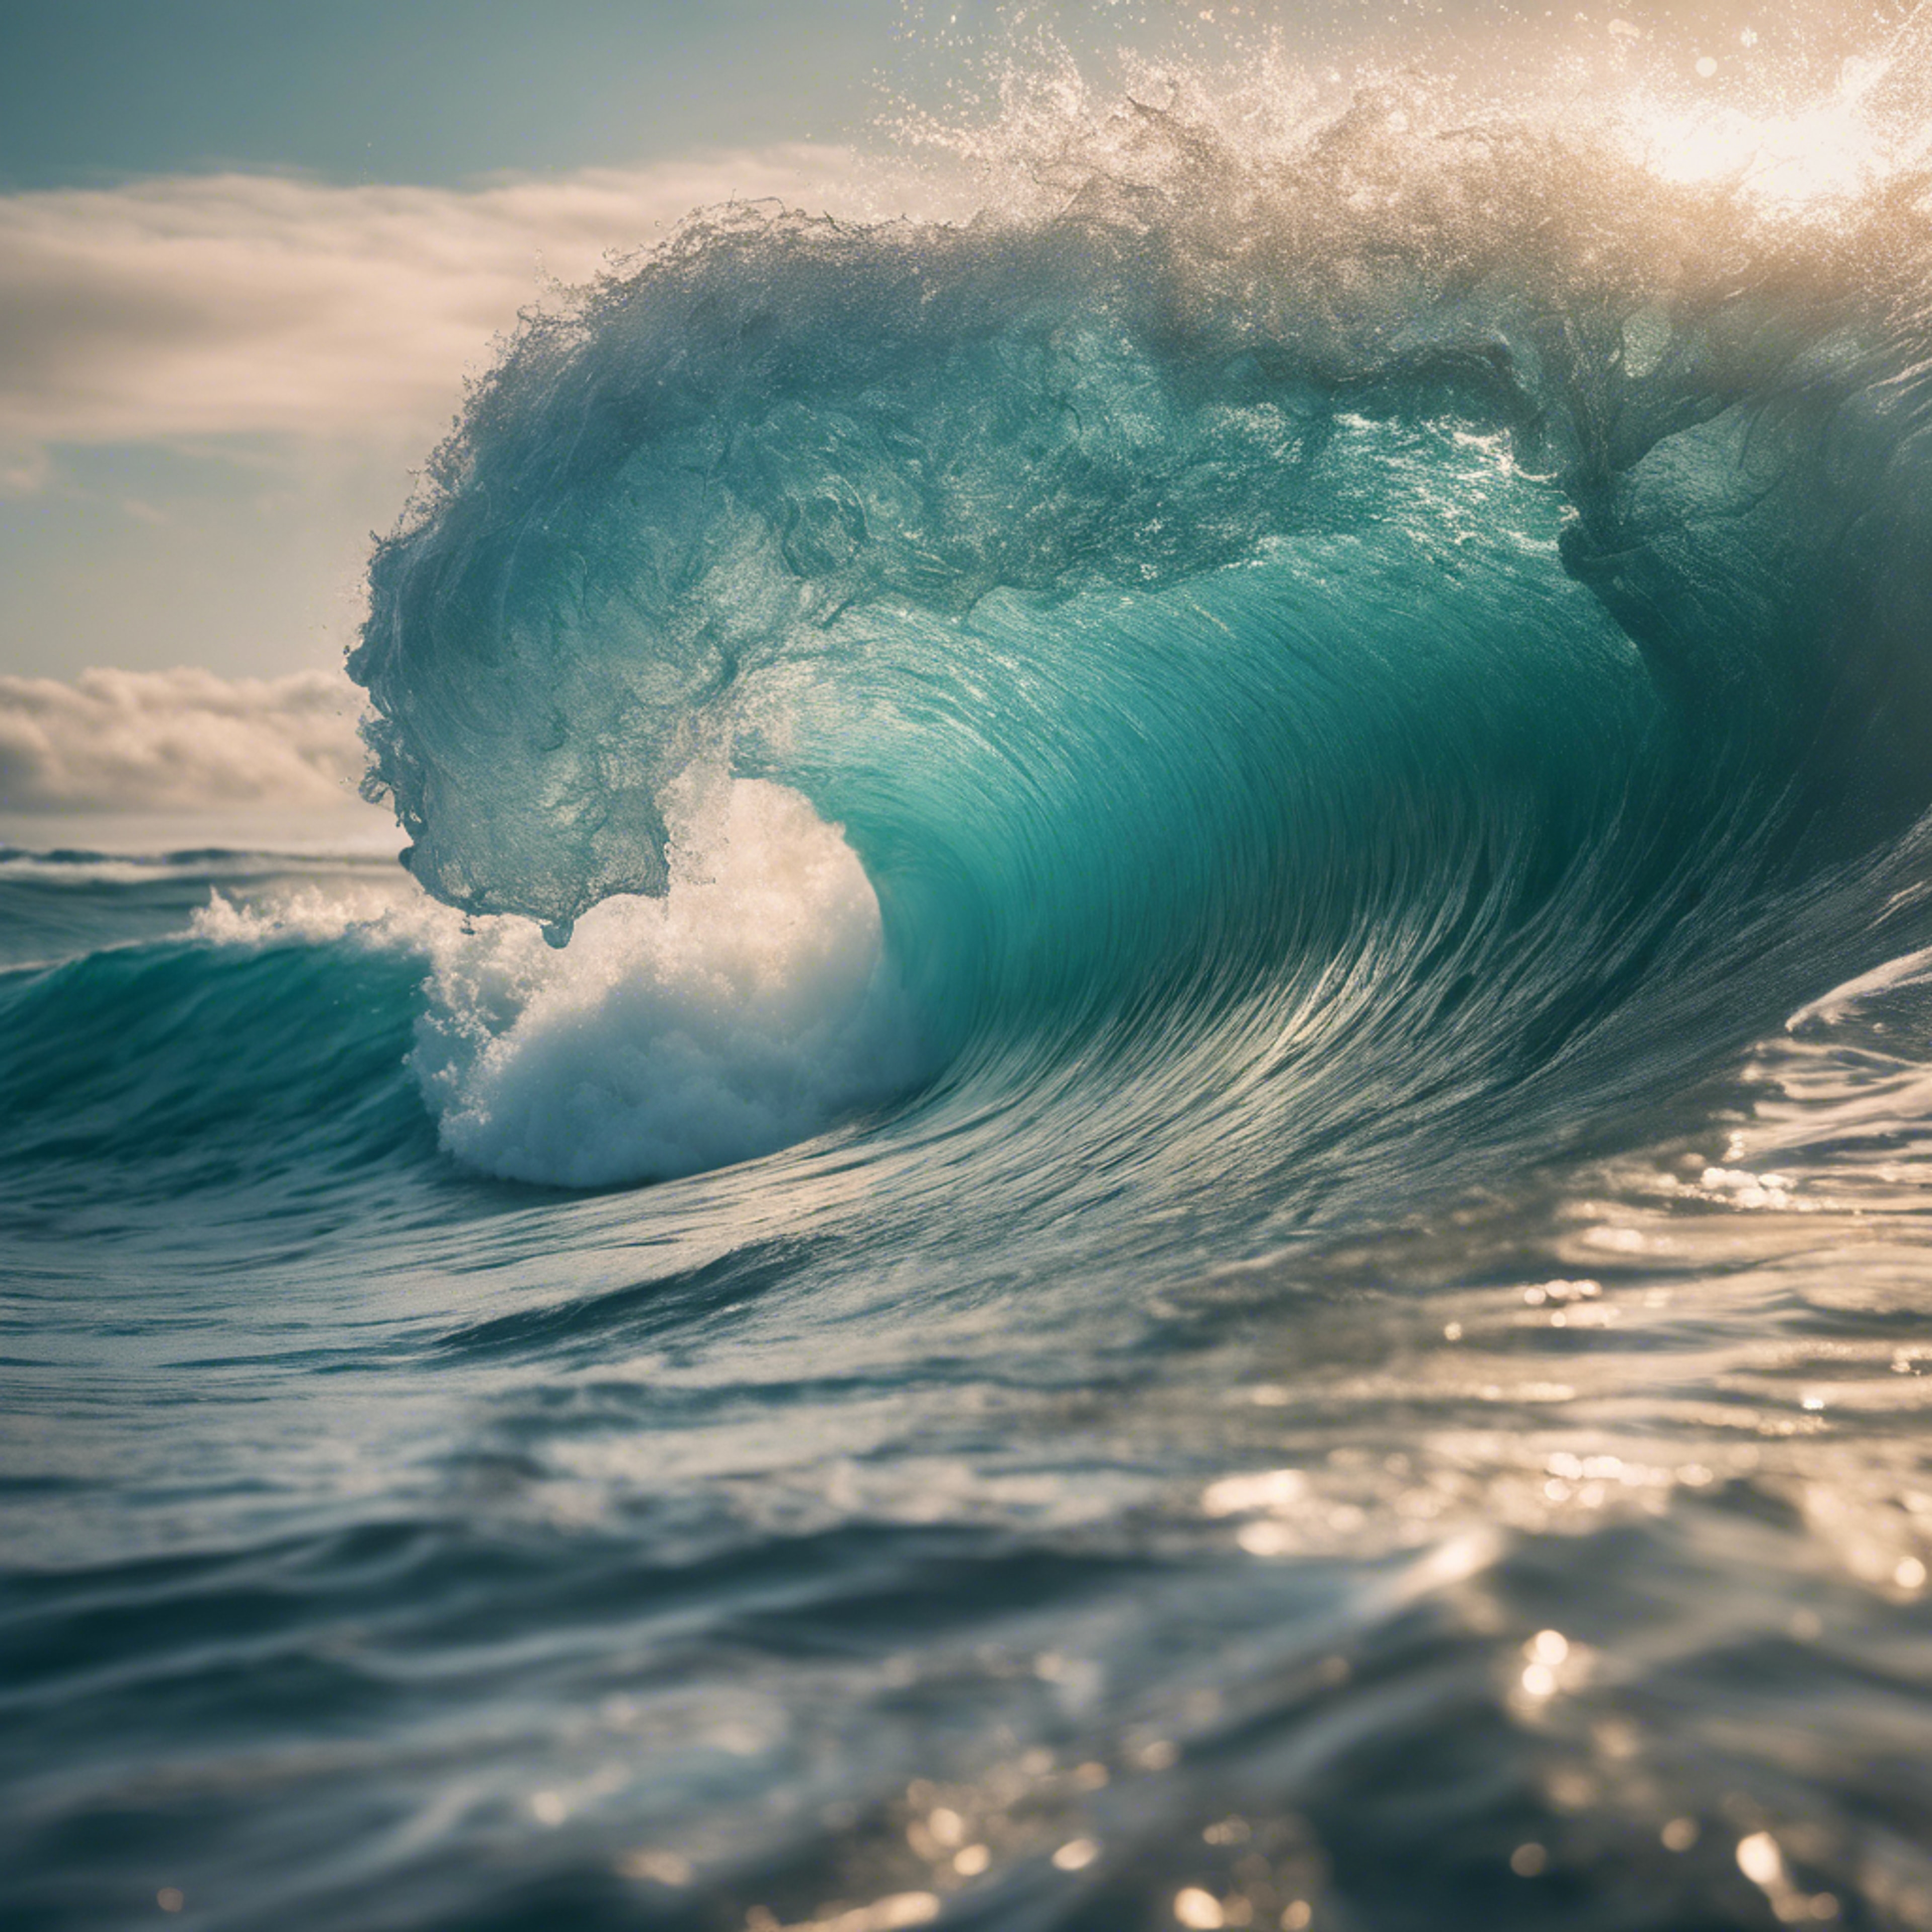 A powerful ocean wave about to crash, casting a cool teal hue. Тапет[600fa377246440af9acb]